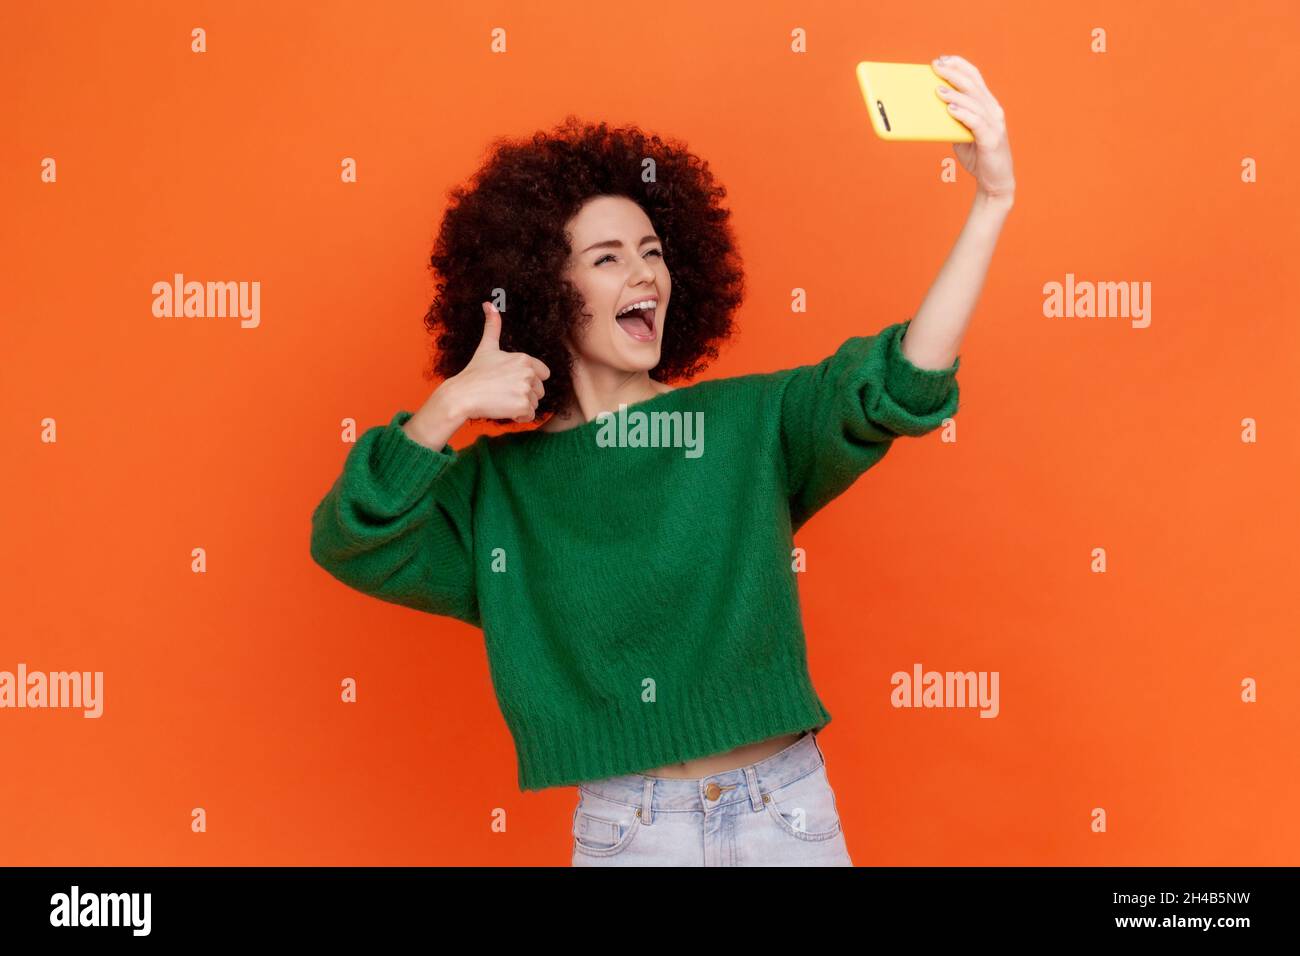 Excited happy woman with Afro hairstyle wearing green casual style sweater has livestream with followers, showing thumb up to camera. Indoor studio shot isolated on orange background. Stock Photo